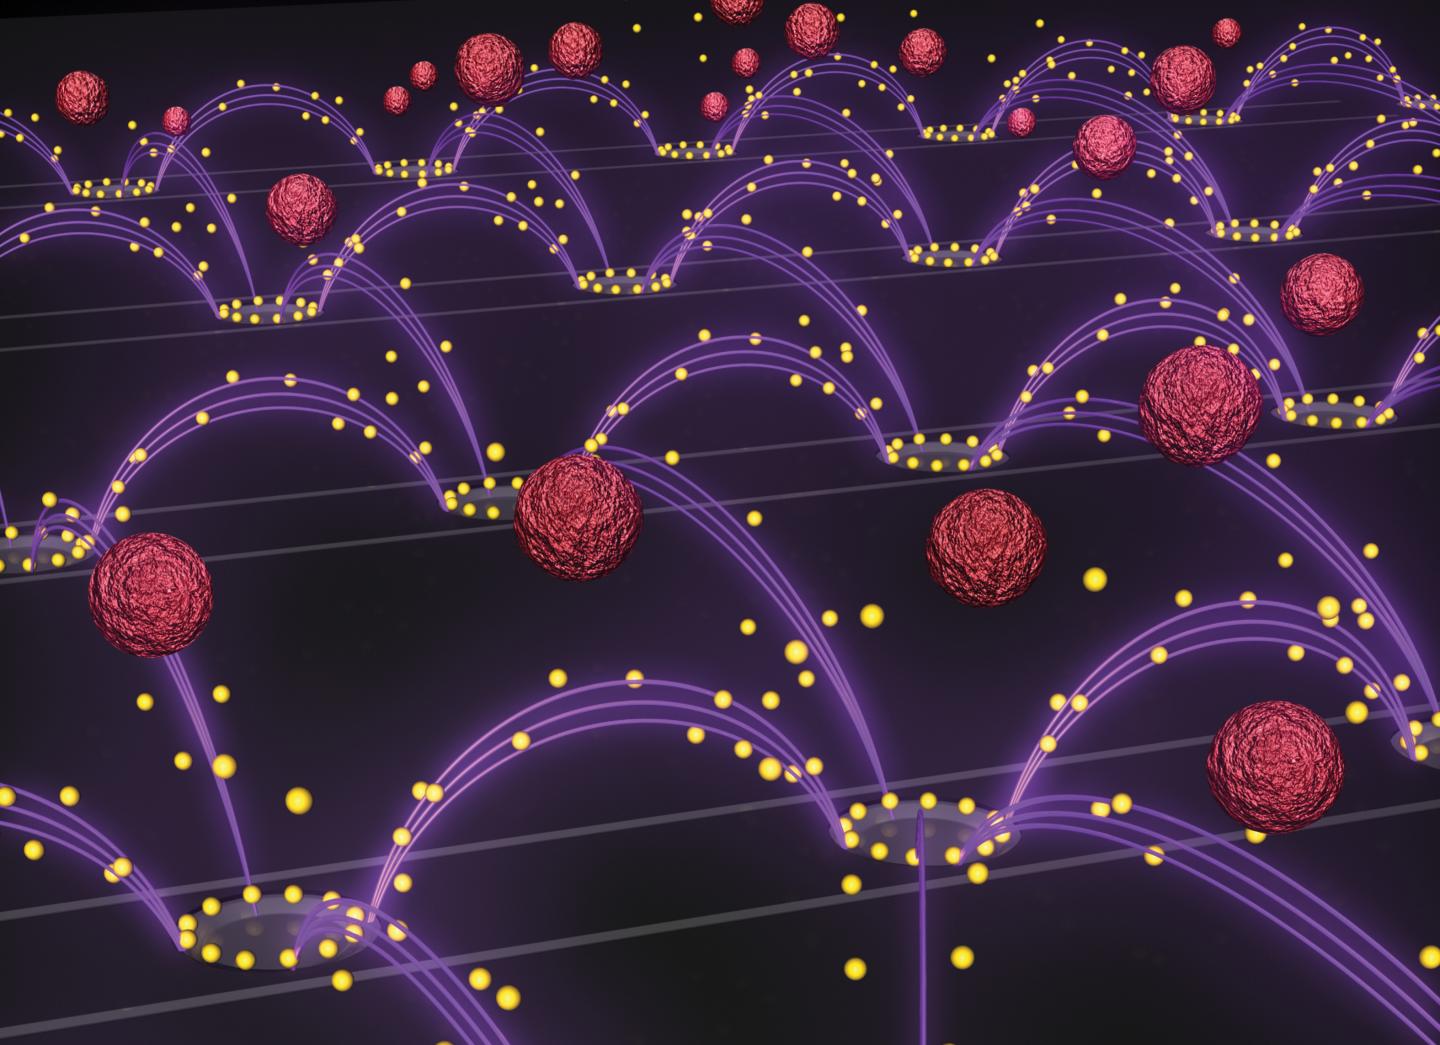  Caption An artist's representation of the nanoparticle removal chip developed by researchers in Professor Michael Heller's lab at the UC San Diego Jacobs School of Engineering. An oscillating electric field (purple arcs) separates drug-delivery nanoparticles (yellow spheres) from blood (red spheres) and pulls them towards rings surrounding the chip's electrodes. The image is featured as the inside cover of the Oct. 14 issue of the journal Small. Credit: Stuart Ibsen and Steven Ibsen.